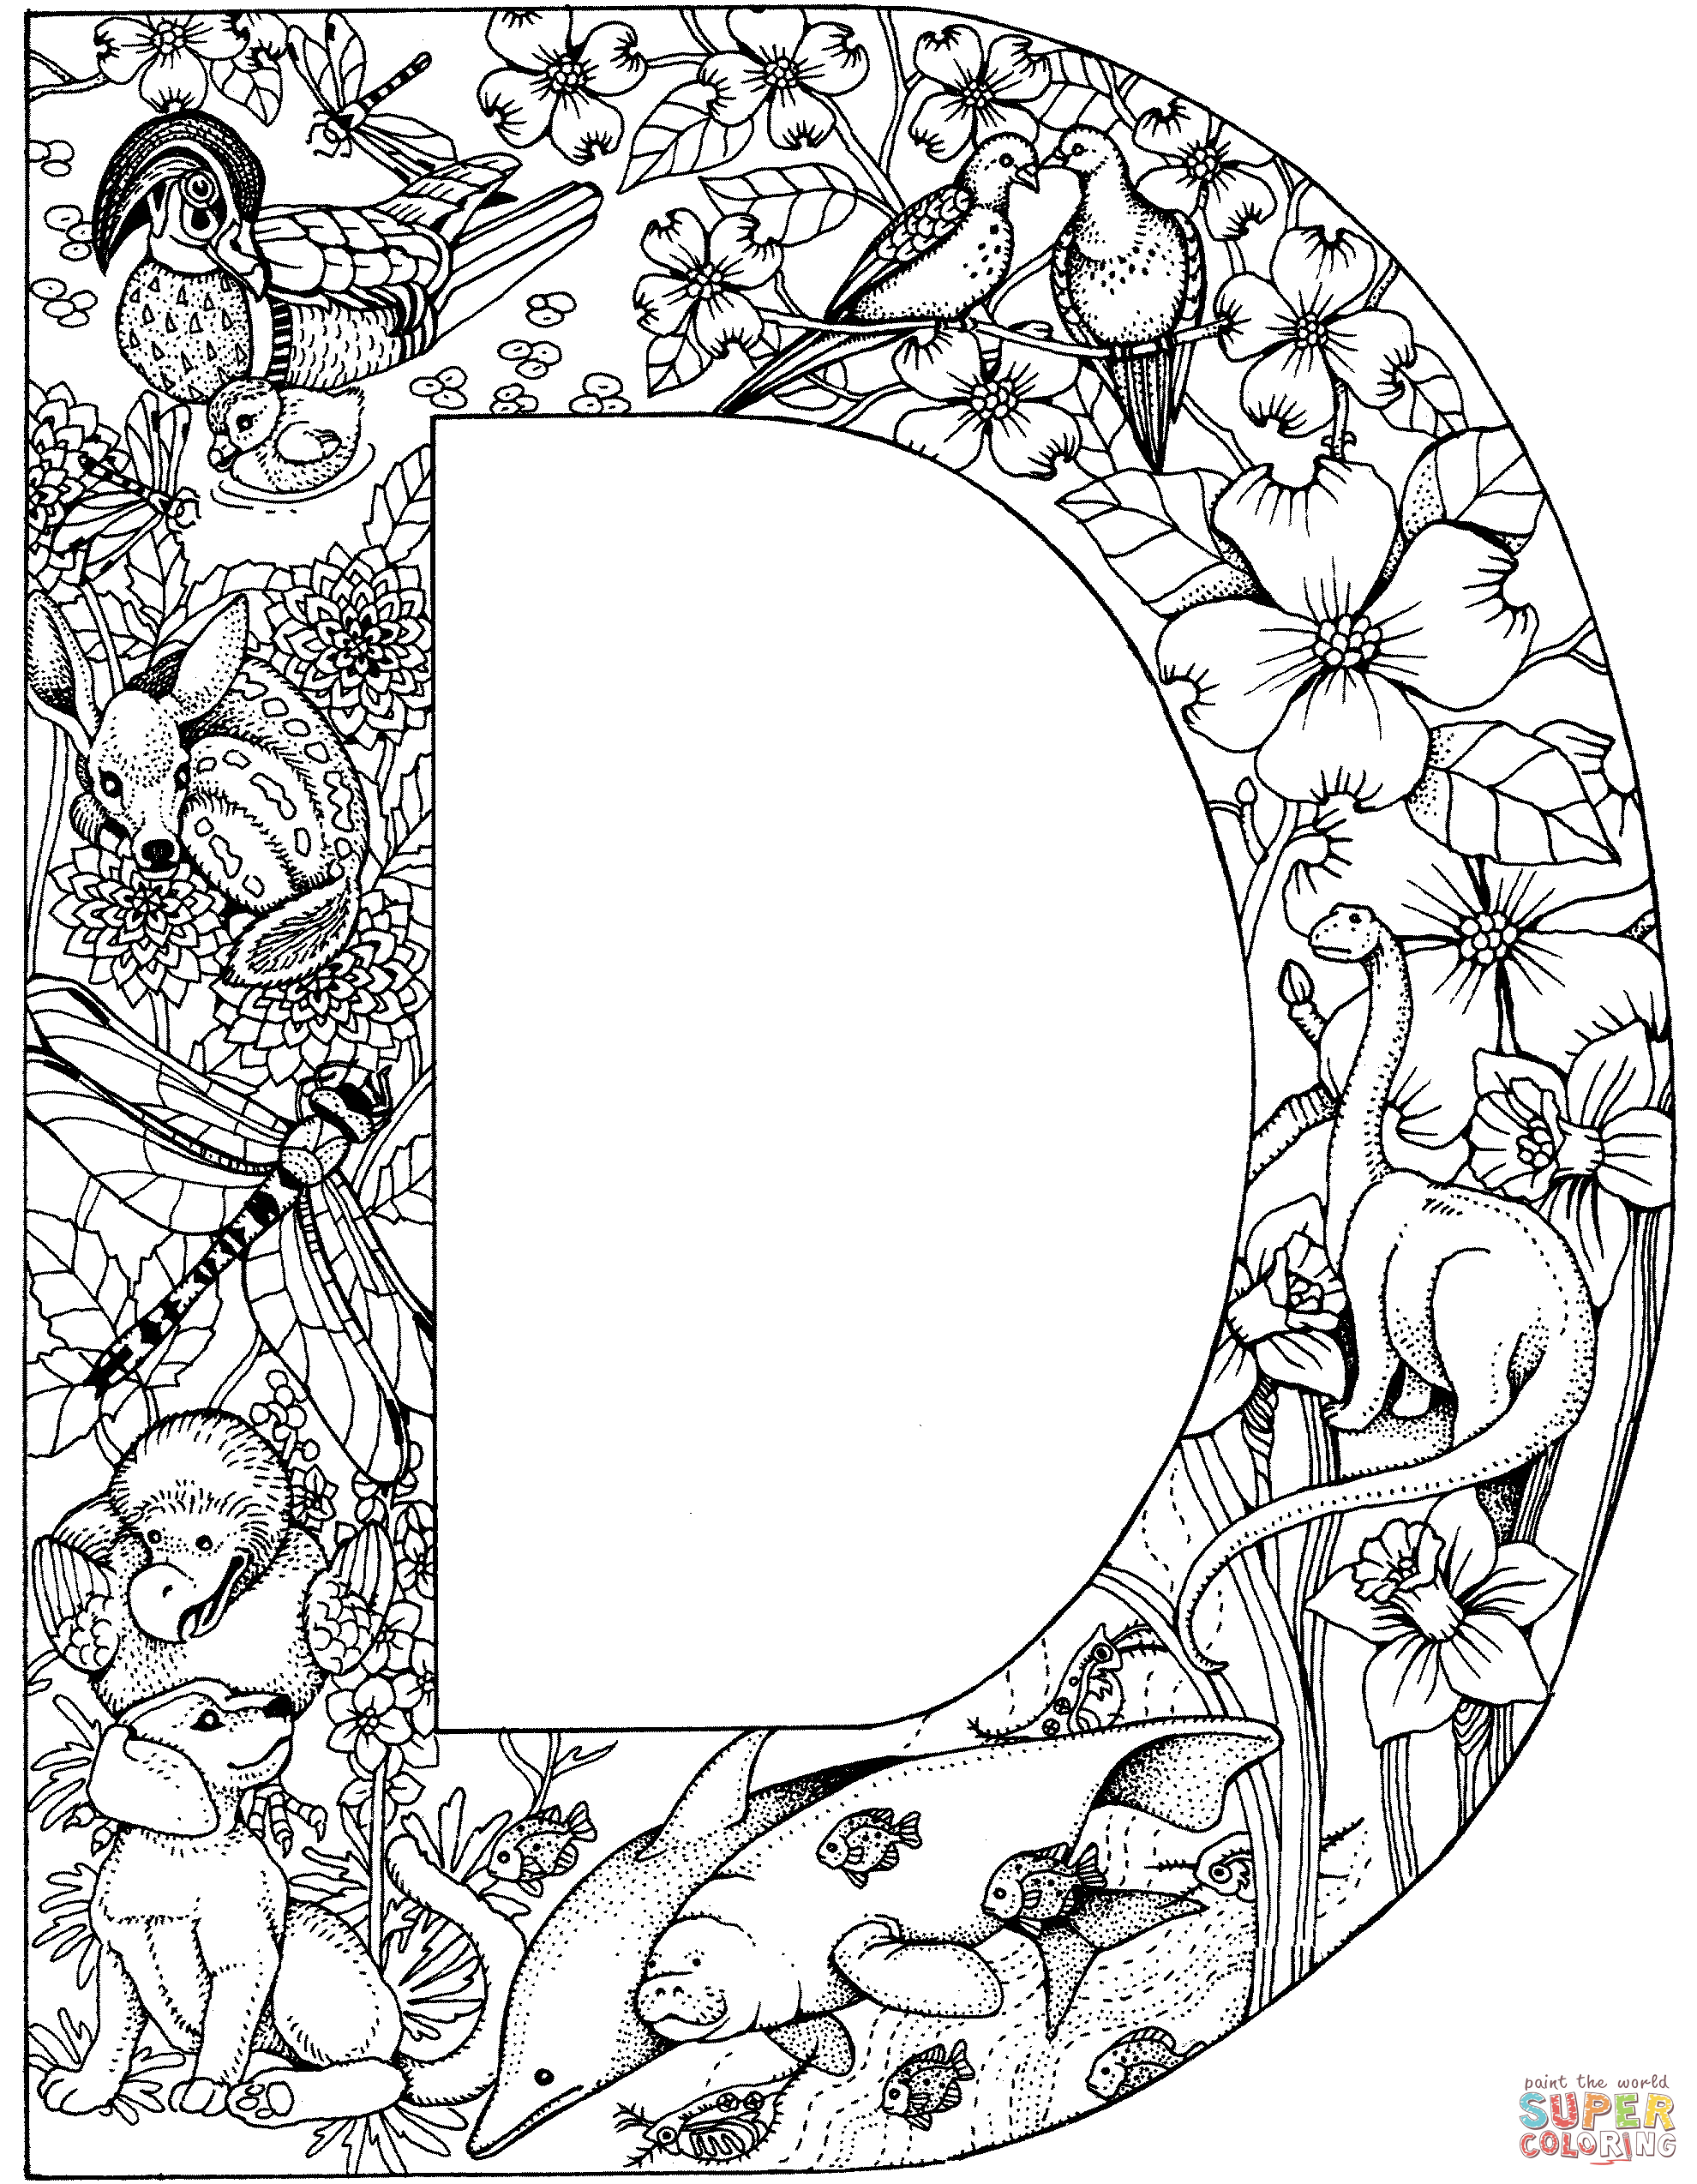 Letter D coloring page | Free Printable Coloring Pages